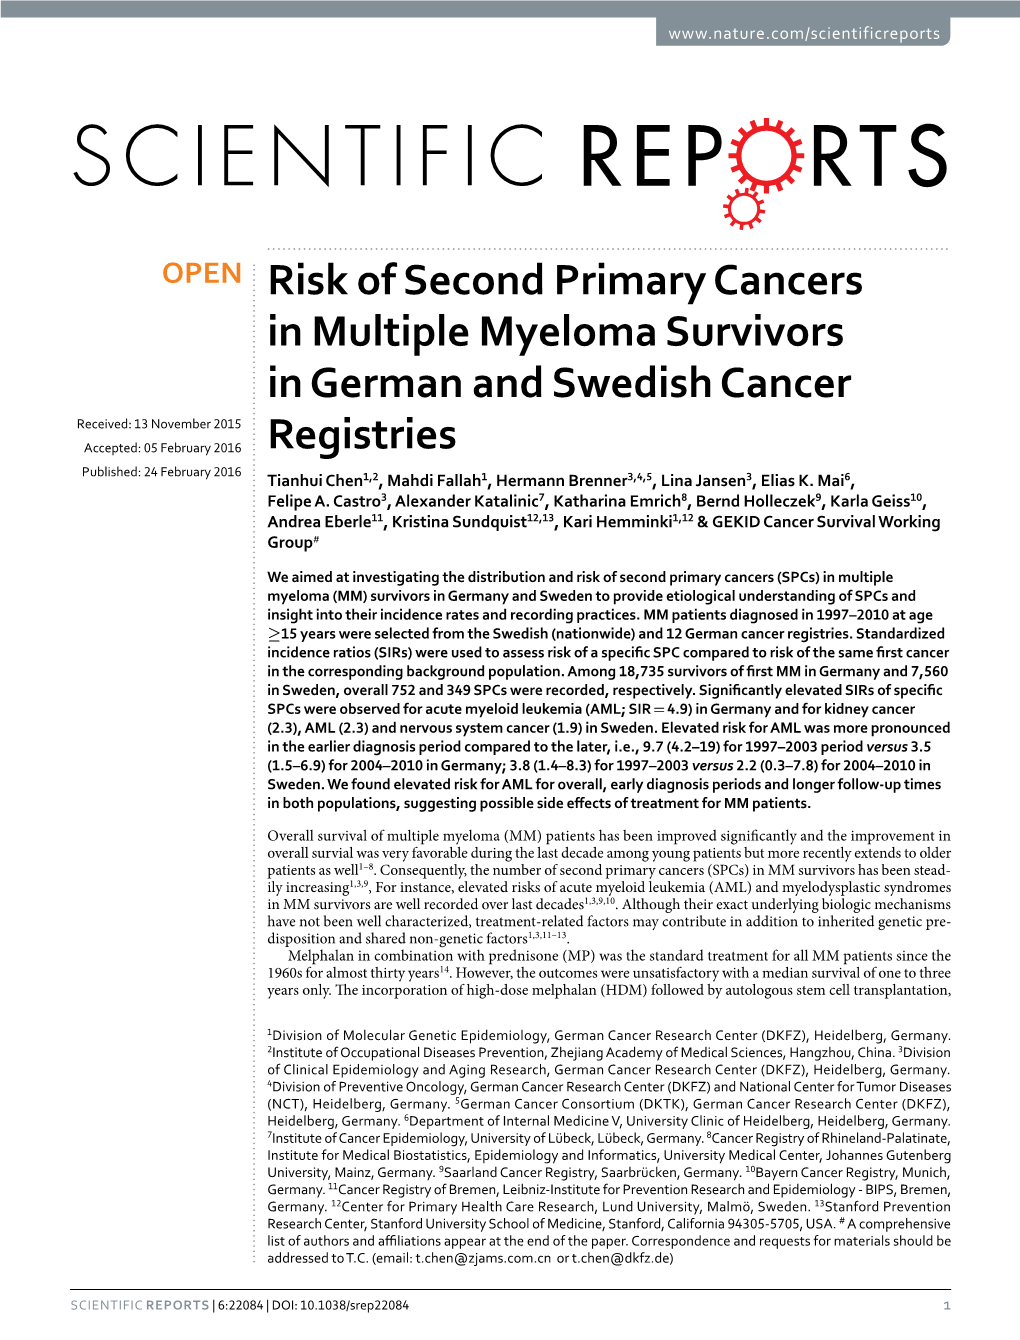 Risk of Second Primary Cancers in Multiple Myeloma Survivors In